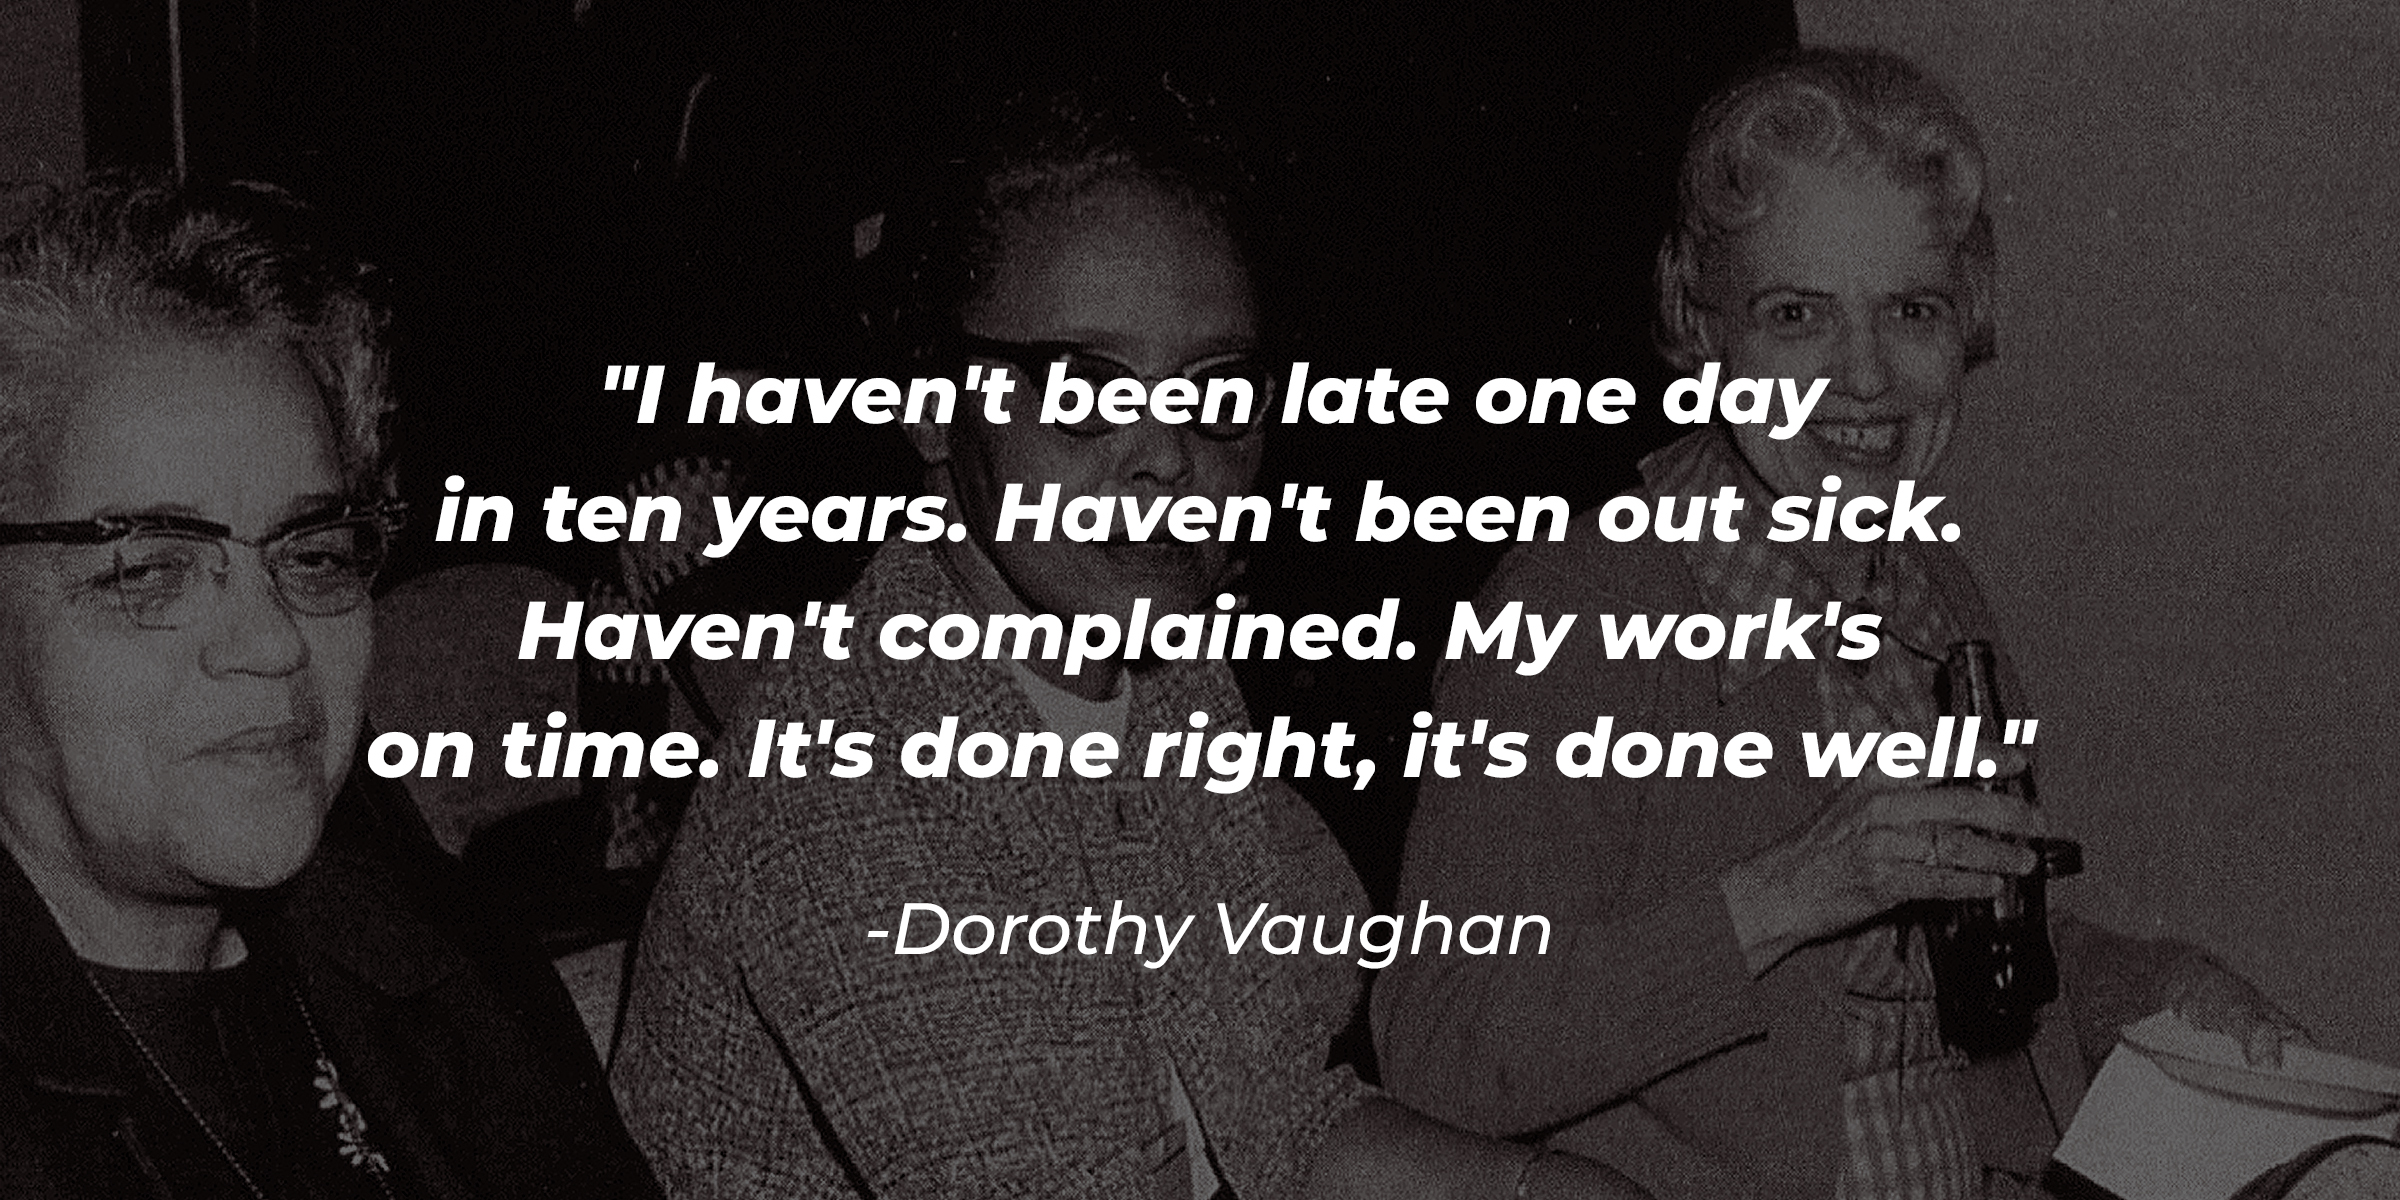 A photo of Dorothy Vaughan, Katherine Johnson and Mary Jackson with Dorothy Vaughan's quote: "I haven't been late one day in ten years. Haven't been out sick. Haven't complained. My work's on time. It's done right, it's done well." | Source: Getty Images